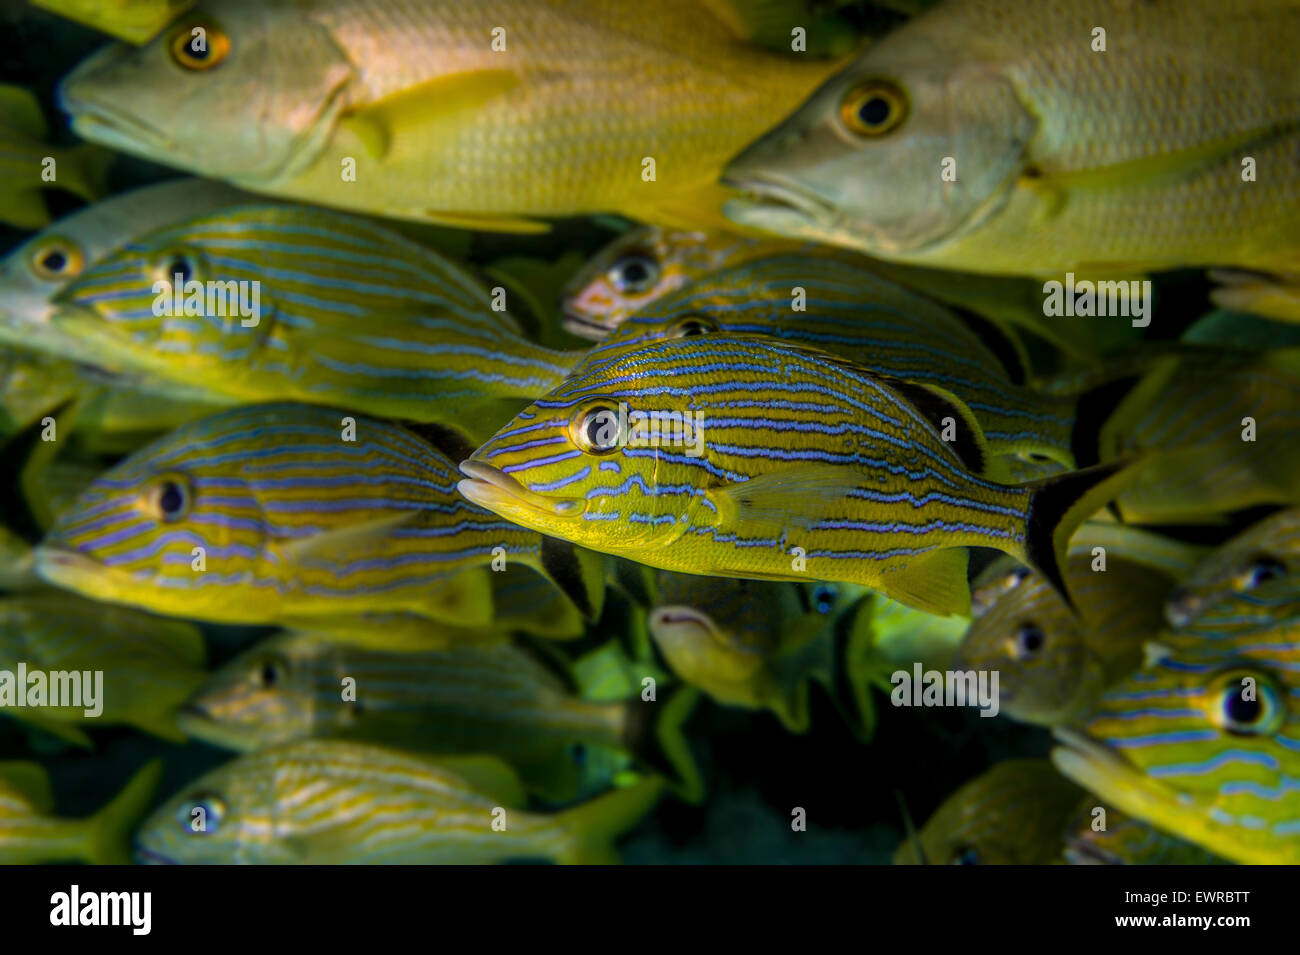 Close-up of schooling fish. Stock Photo